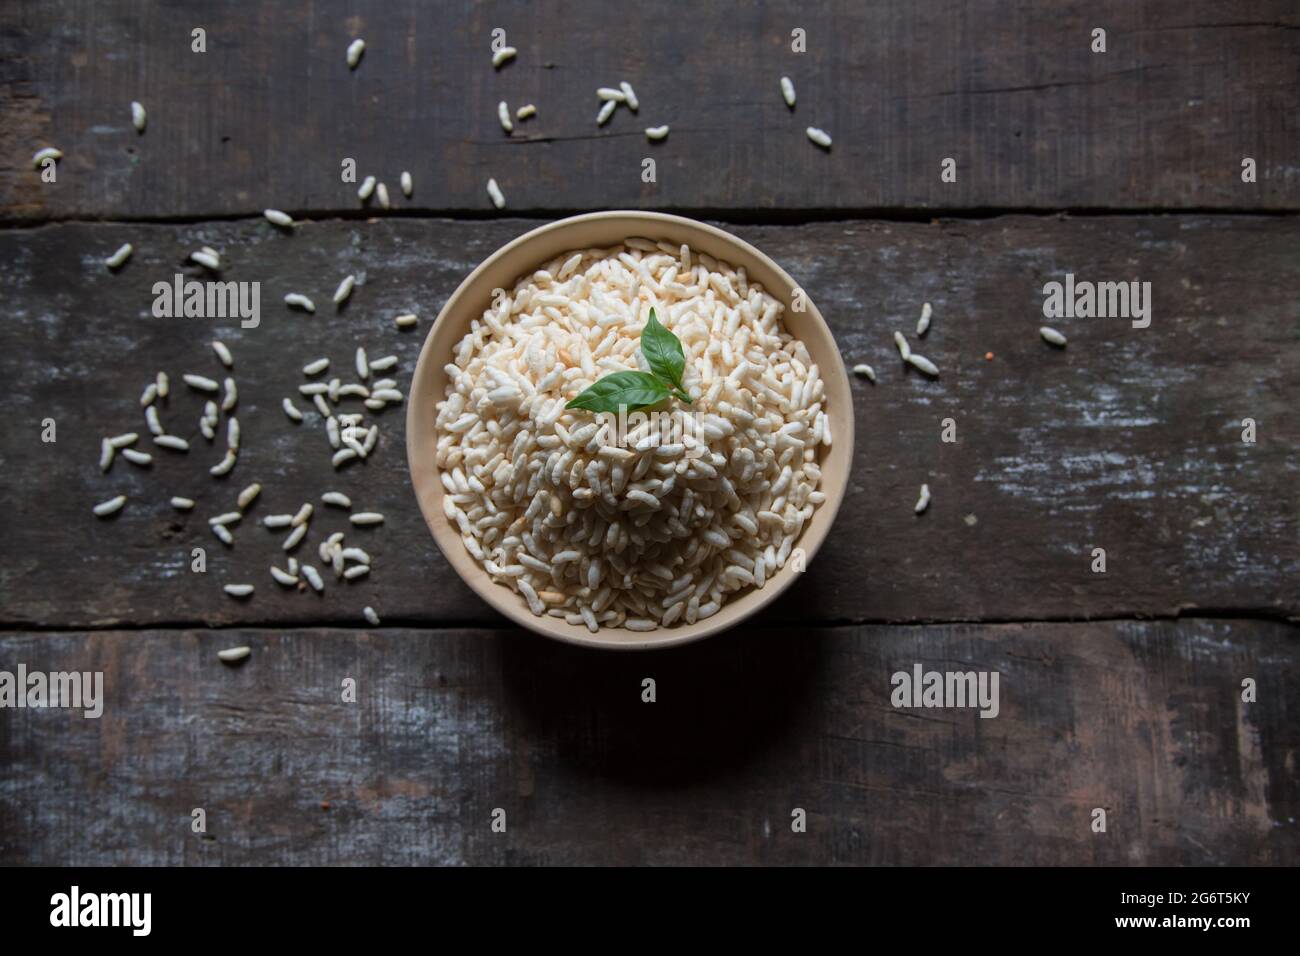 Puffed rice or muri in a heap in a bowl. Top view, selective focus. Stock Photo